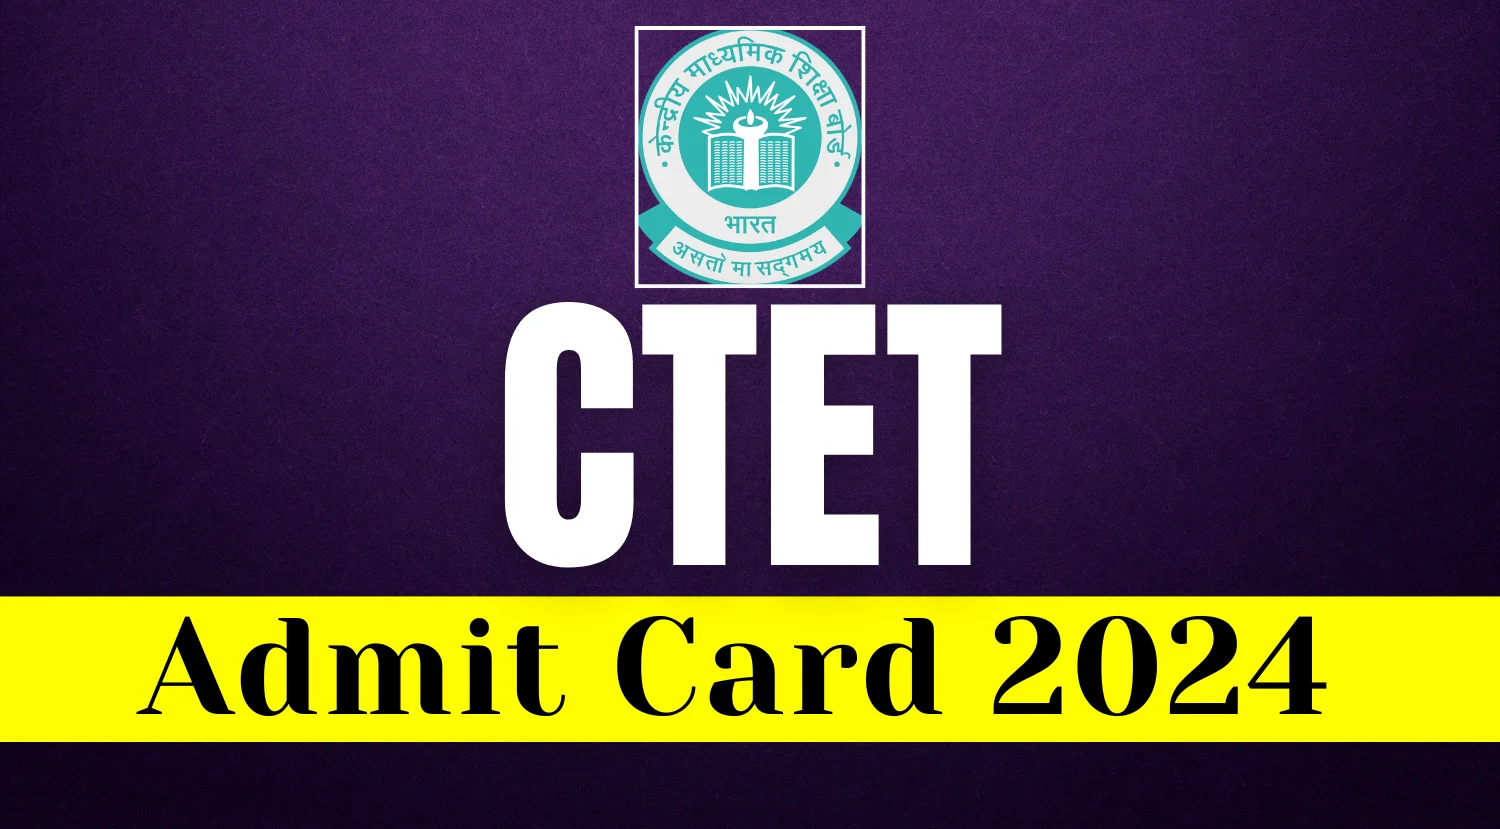 CTET Admit Card 2024 Out Today, Check Your Hall Ticket Details Here Now 